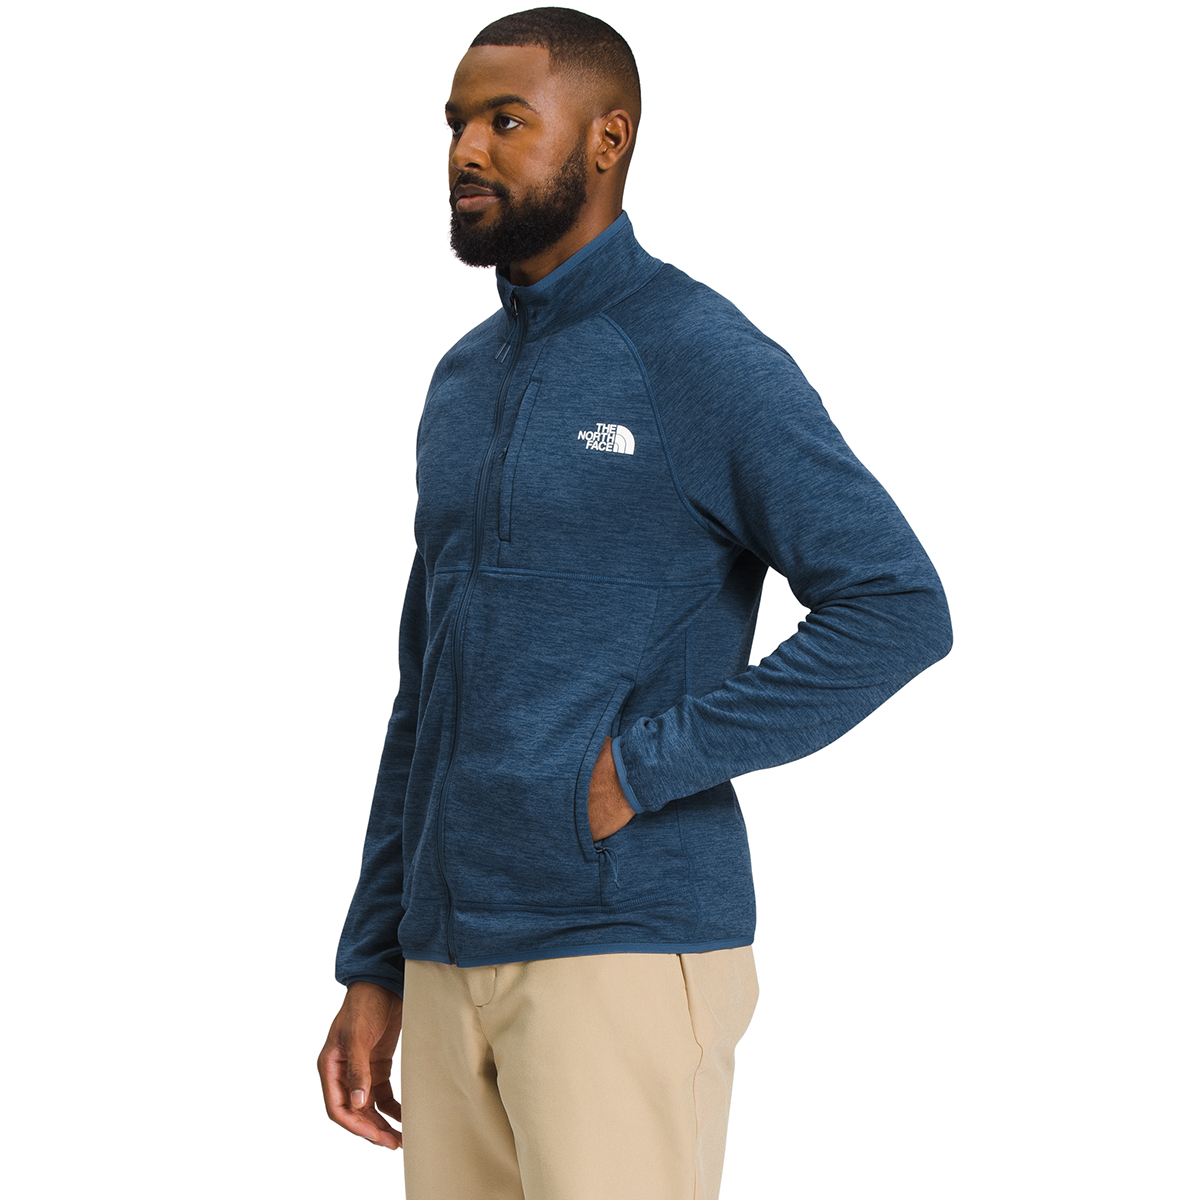 The North Face Men's Canyonlands Full Zip - Size XL